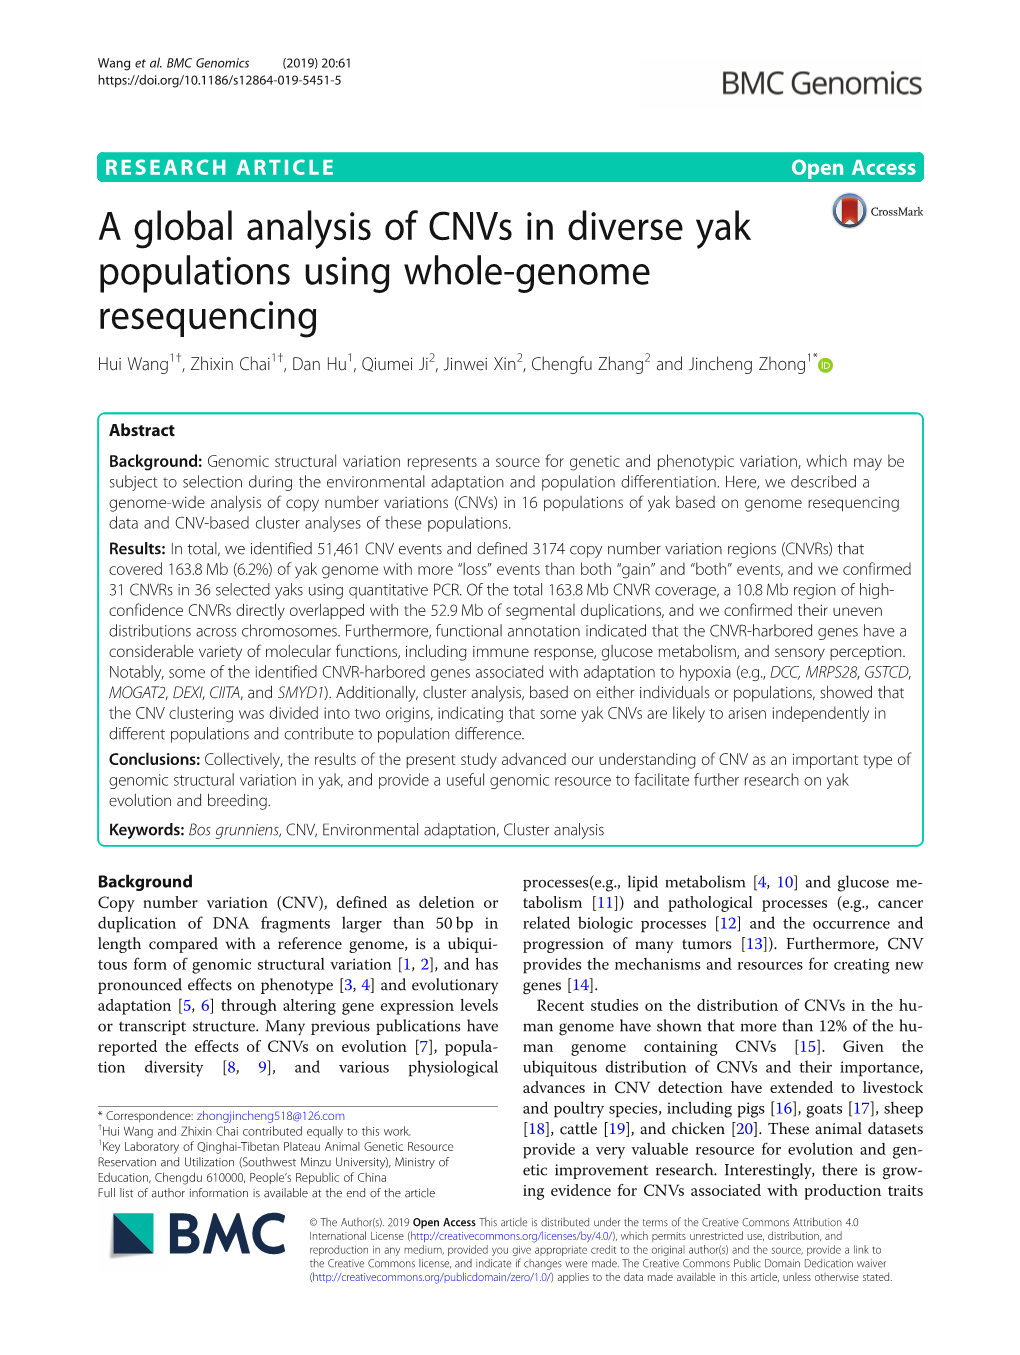 A Global Analysis of Cnvs in Diverse Yak Populations Using Whole